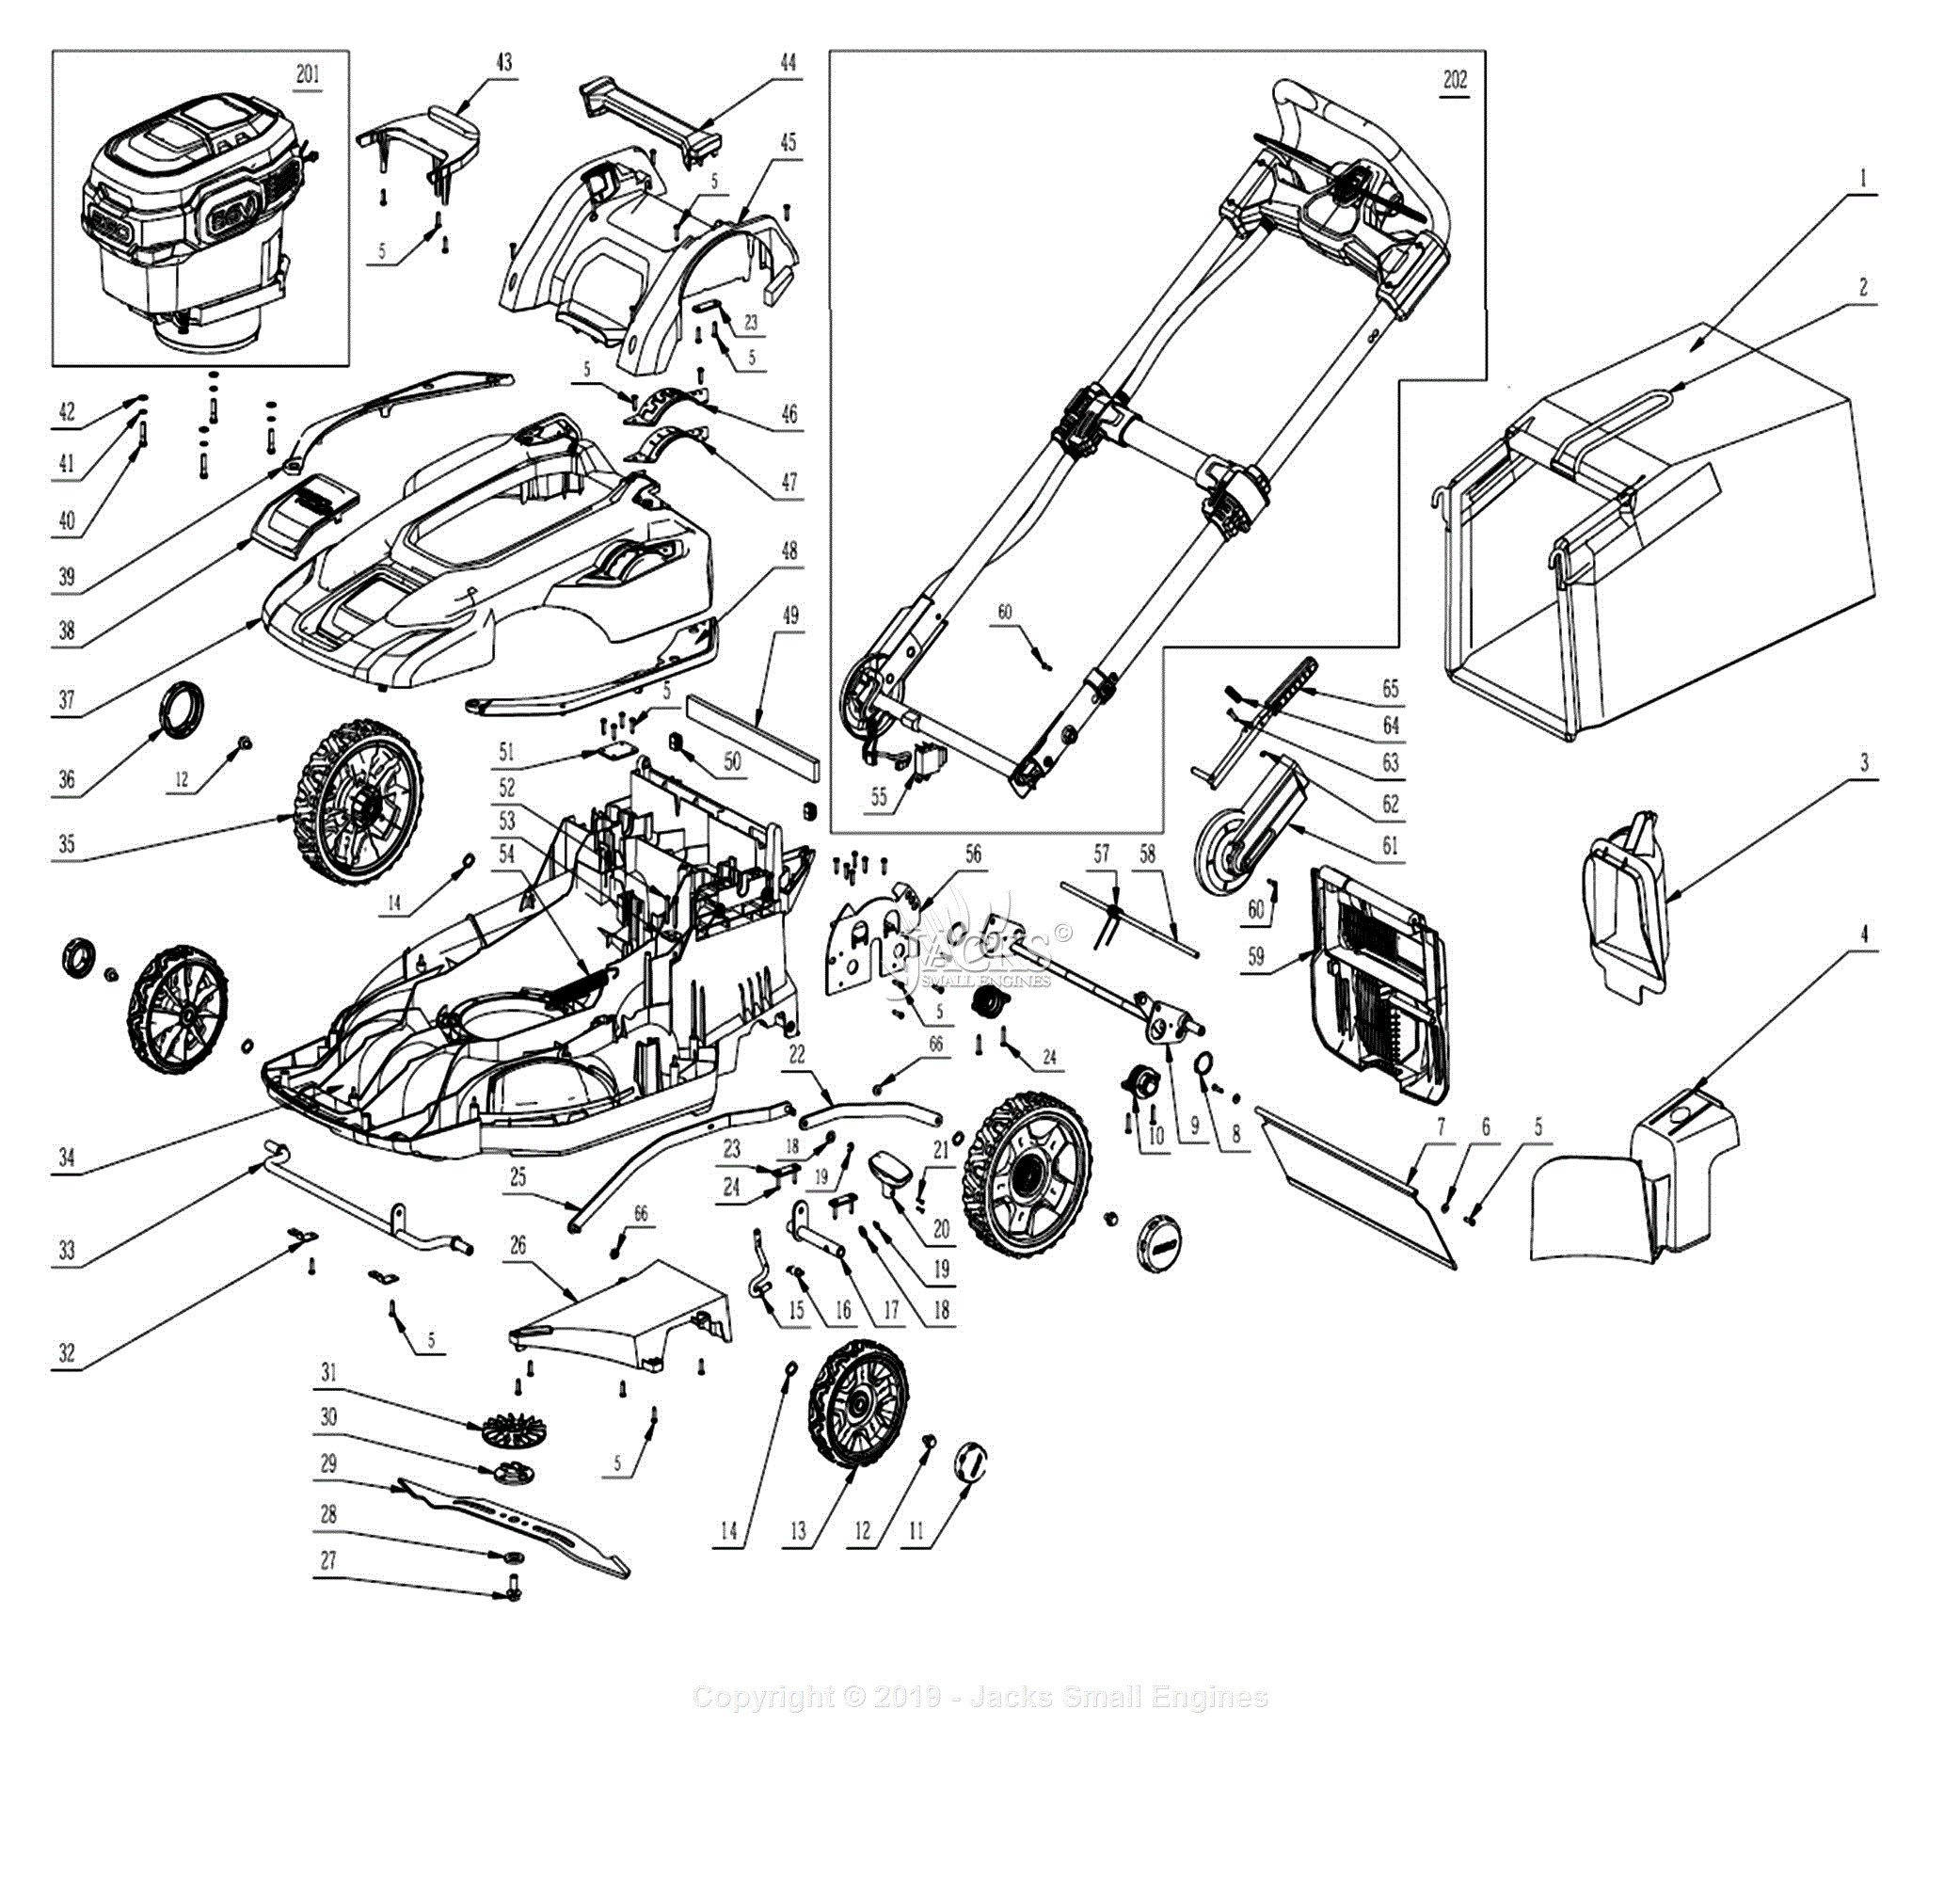 Ego Lawn Mower Wiring Diagram Science and Education